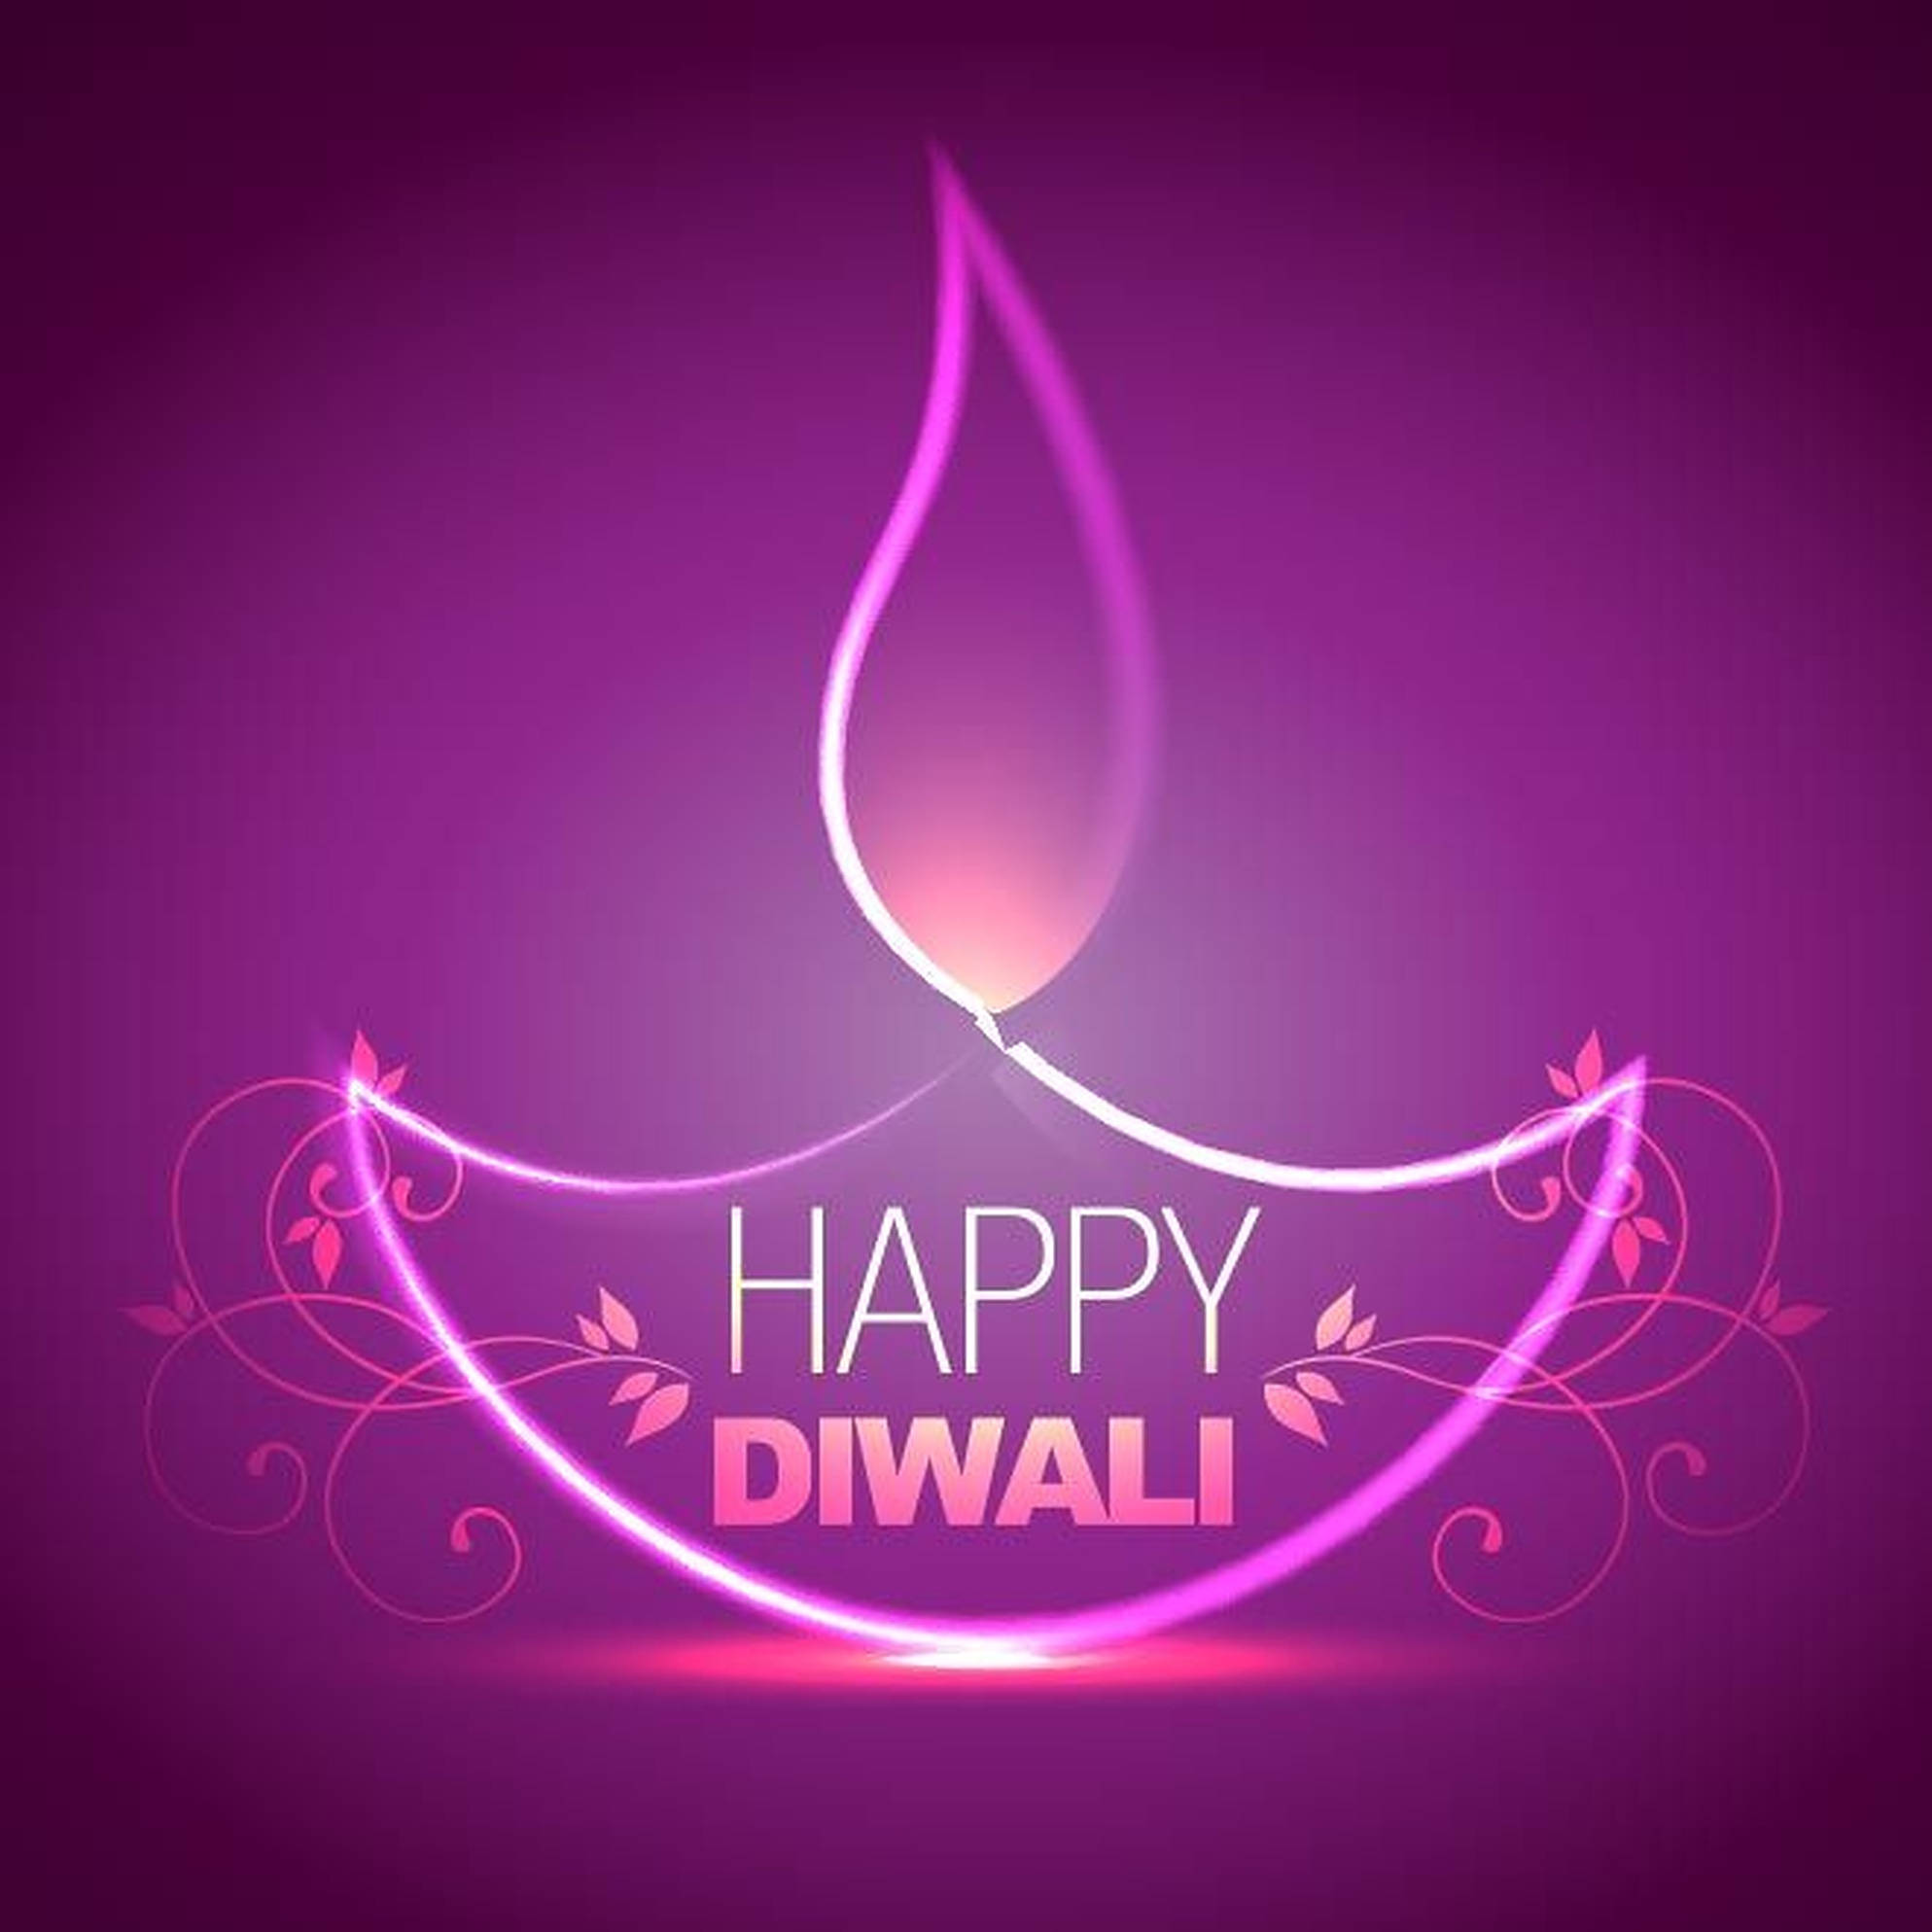 Beautiful Banner Of A Neon Pink Diya For Celebration Of Diwali Set On A Purple Background